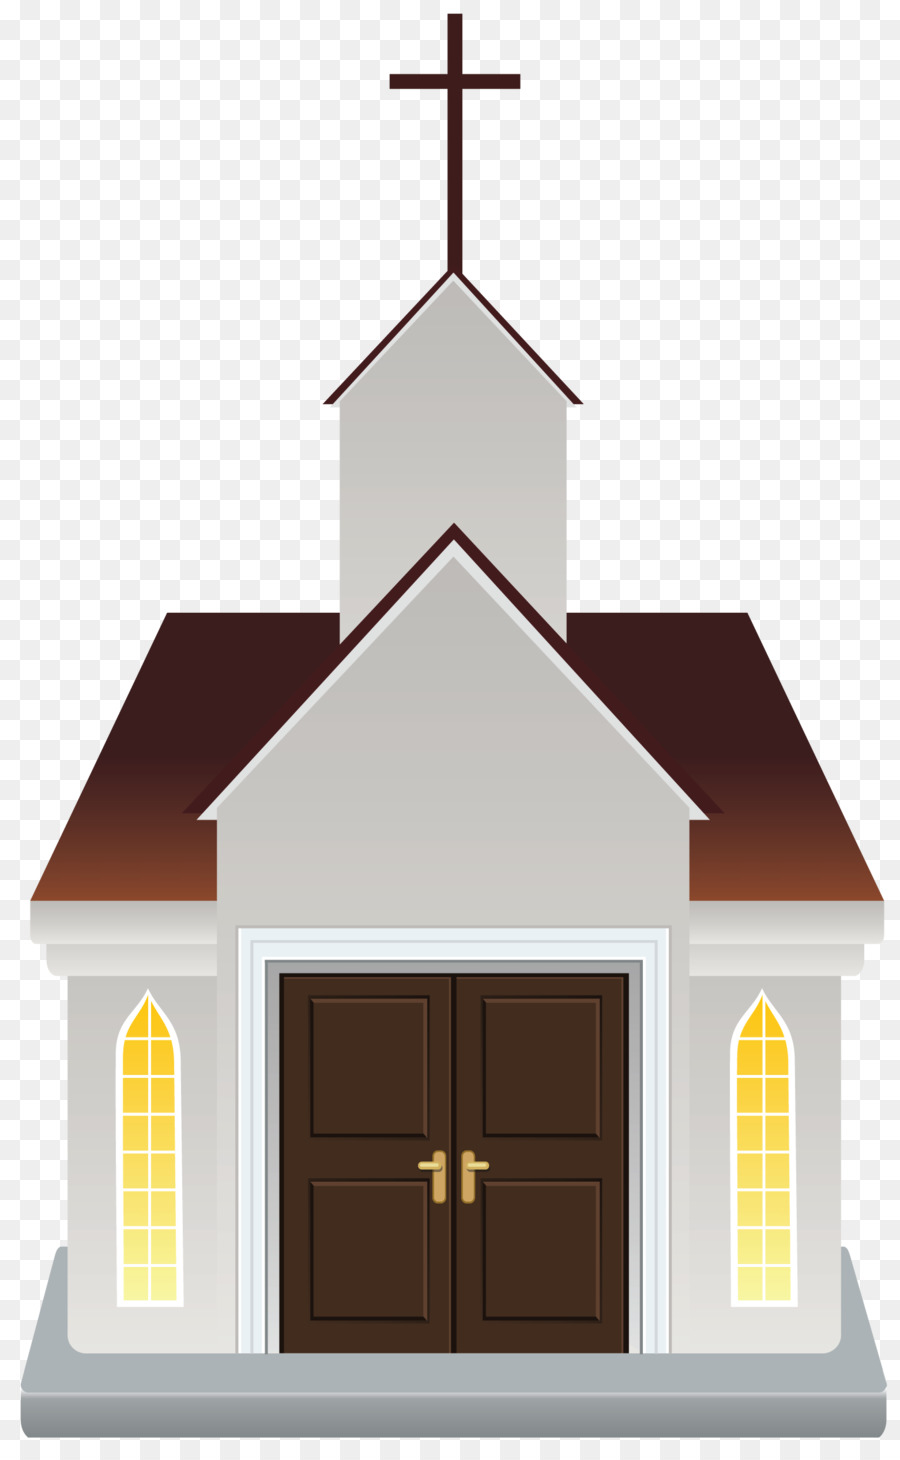 Free Church Transparent, Download Free Church Transparent png images